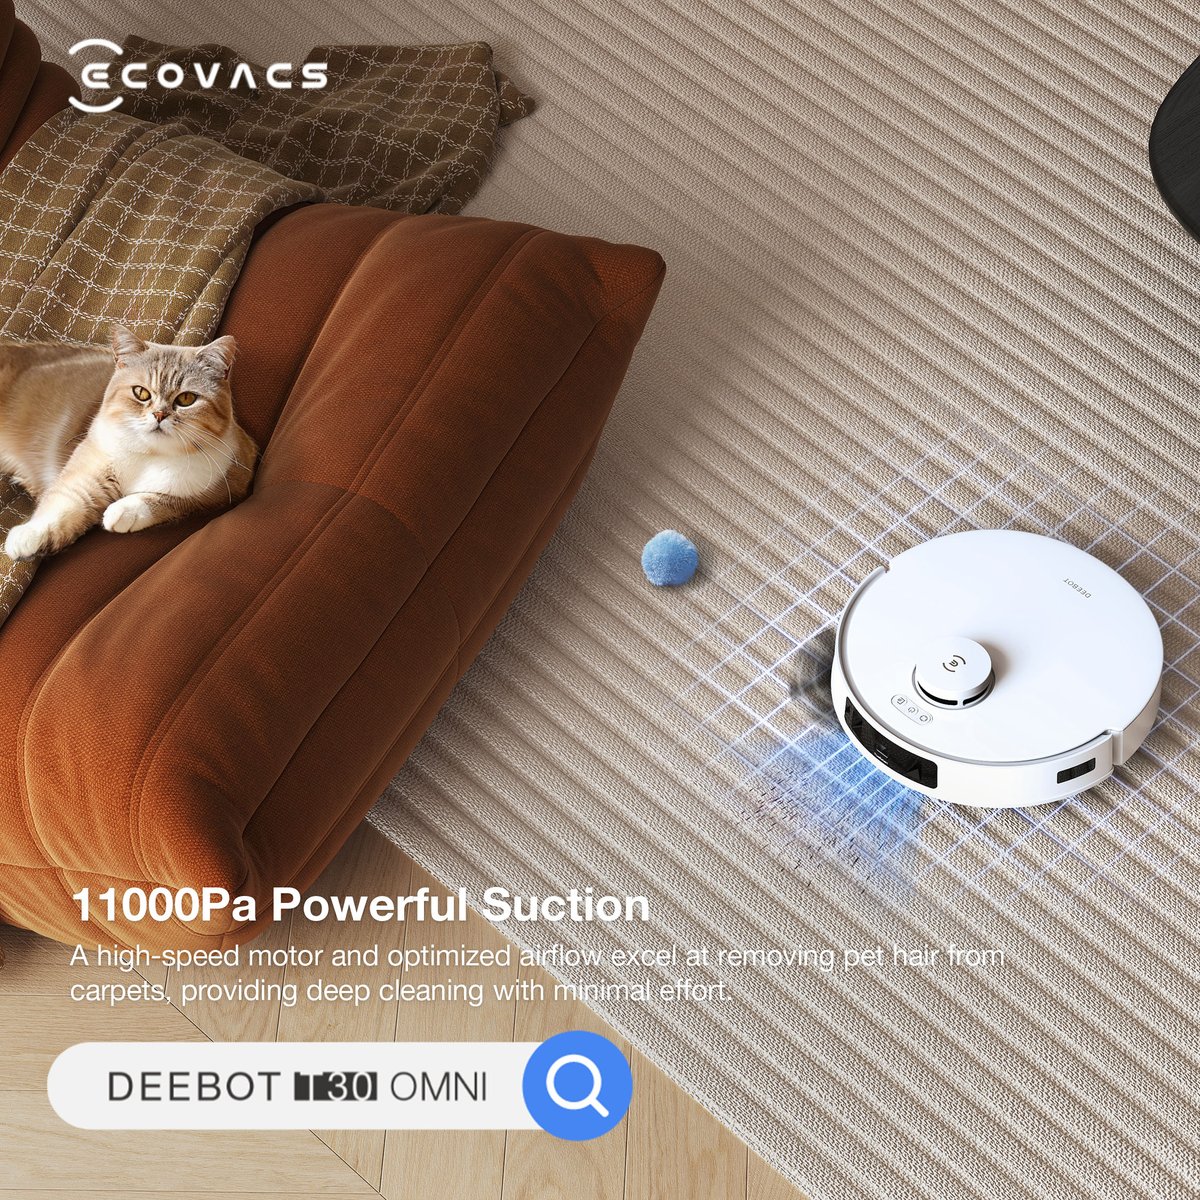 Elevate cleaning with DEEBOT T30 Family: 1/ TruEdge precision mopping. 🌟 2/ No hair jams with ZeroTangle. 🌬️ 3/ Compact, smart Mini OMNI Station. 🏡 4/ 11000Pa suction for clean floors. 💨 🛒 Shop now via linktr.ee/XECOVACS #DEEBOTT30 #PetsofECOVACS #PawsomeDEEBOT